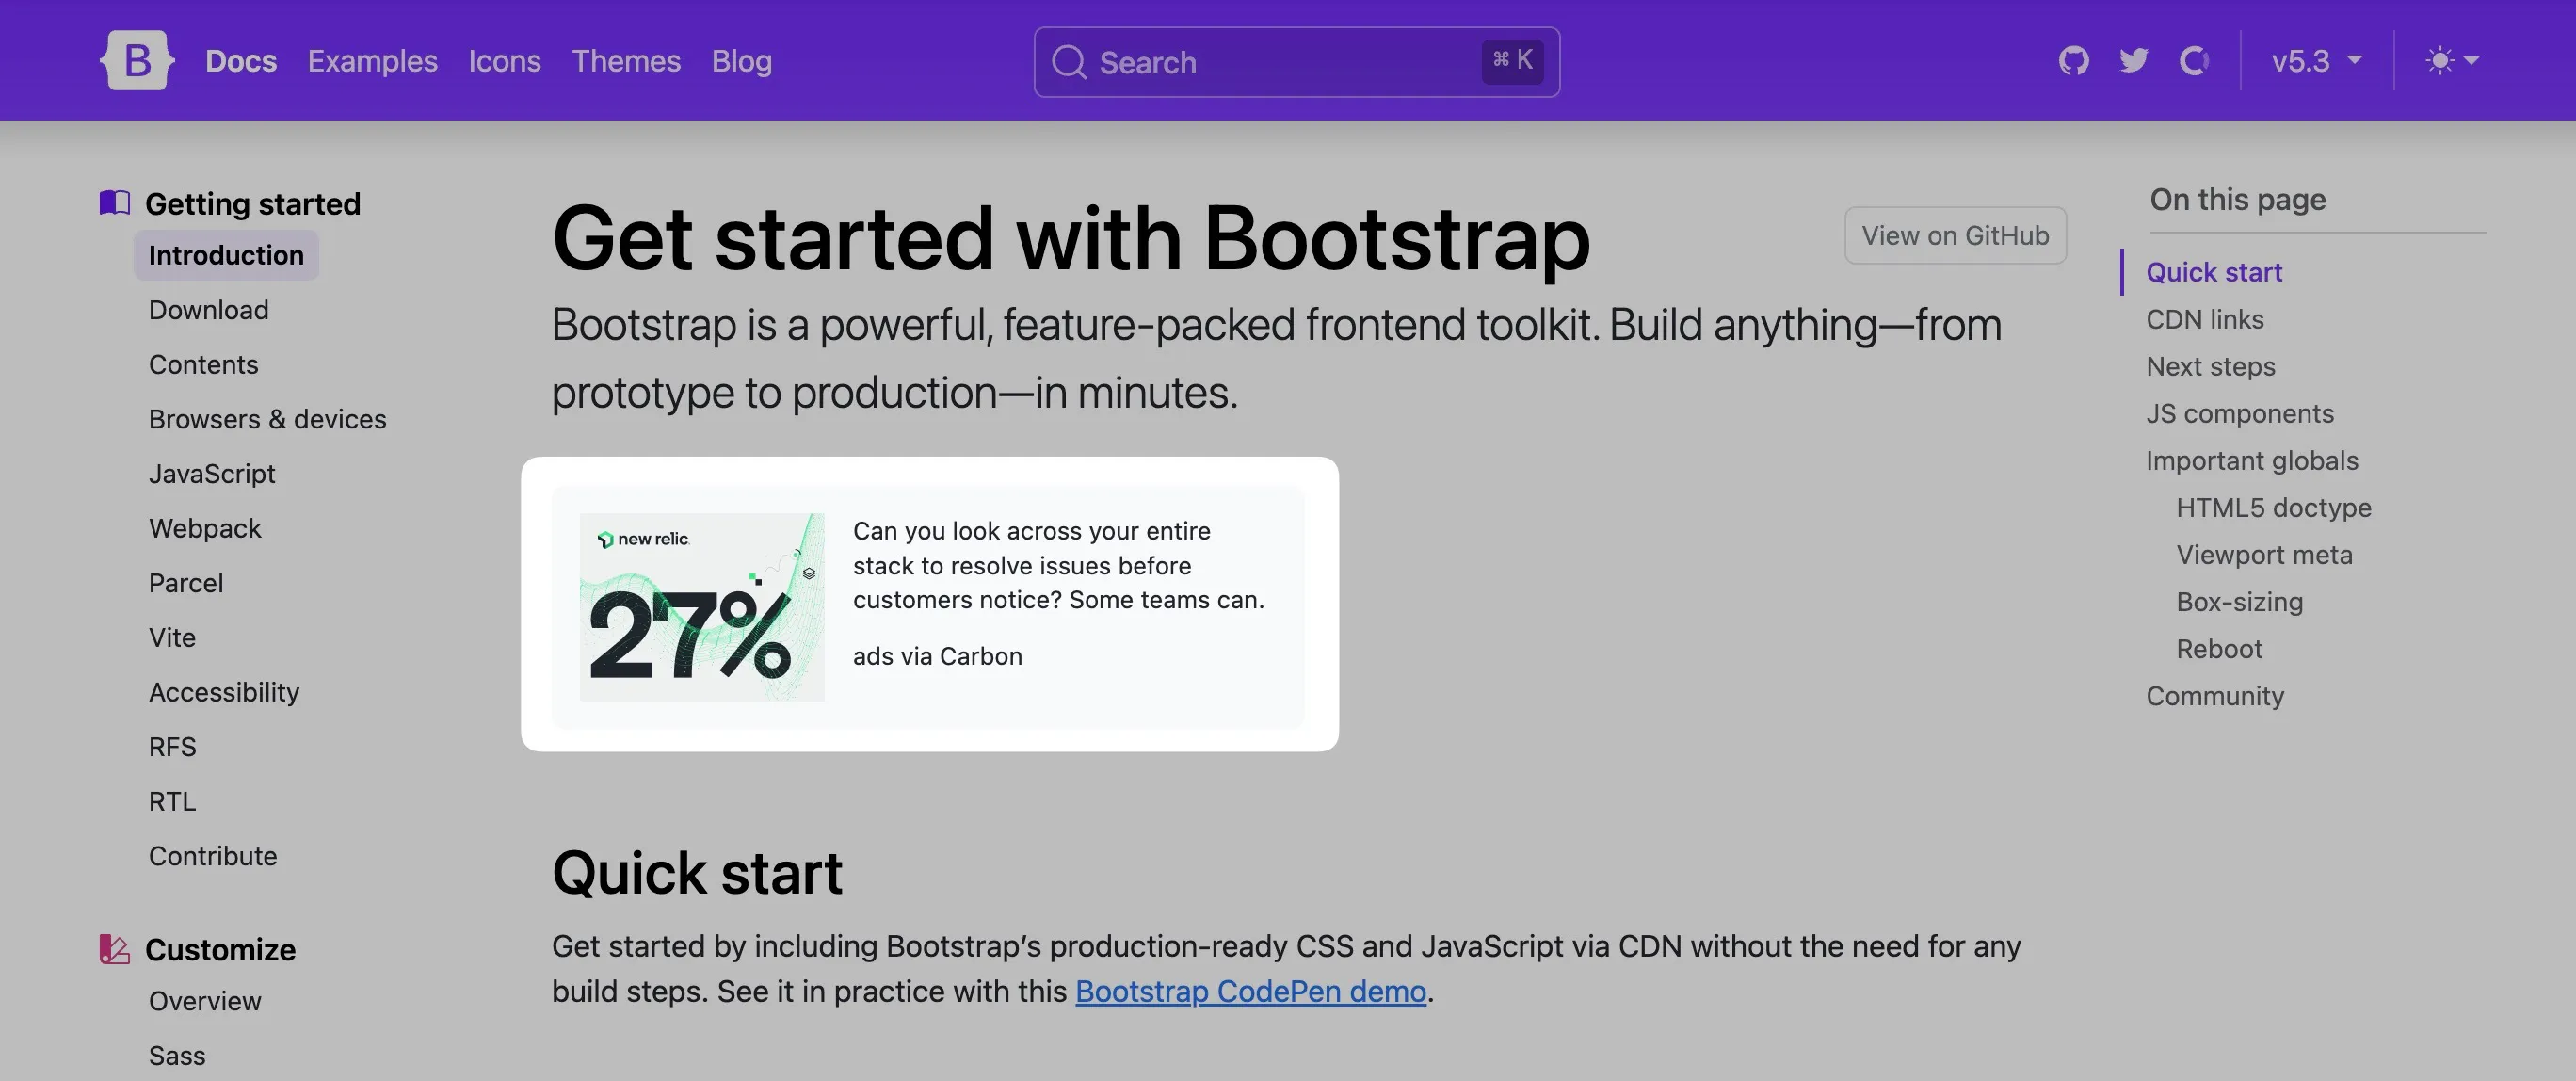 Bootstrap introduces Carbon after the introduction paragraph